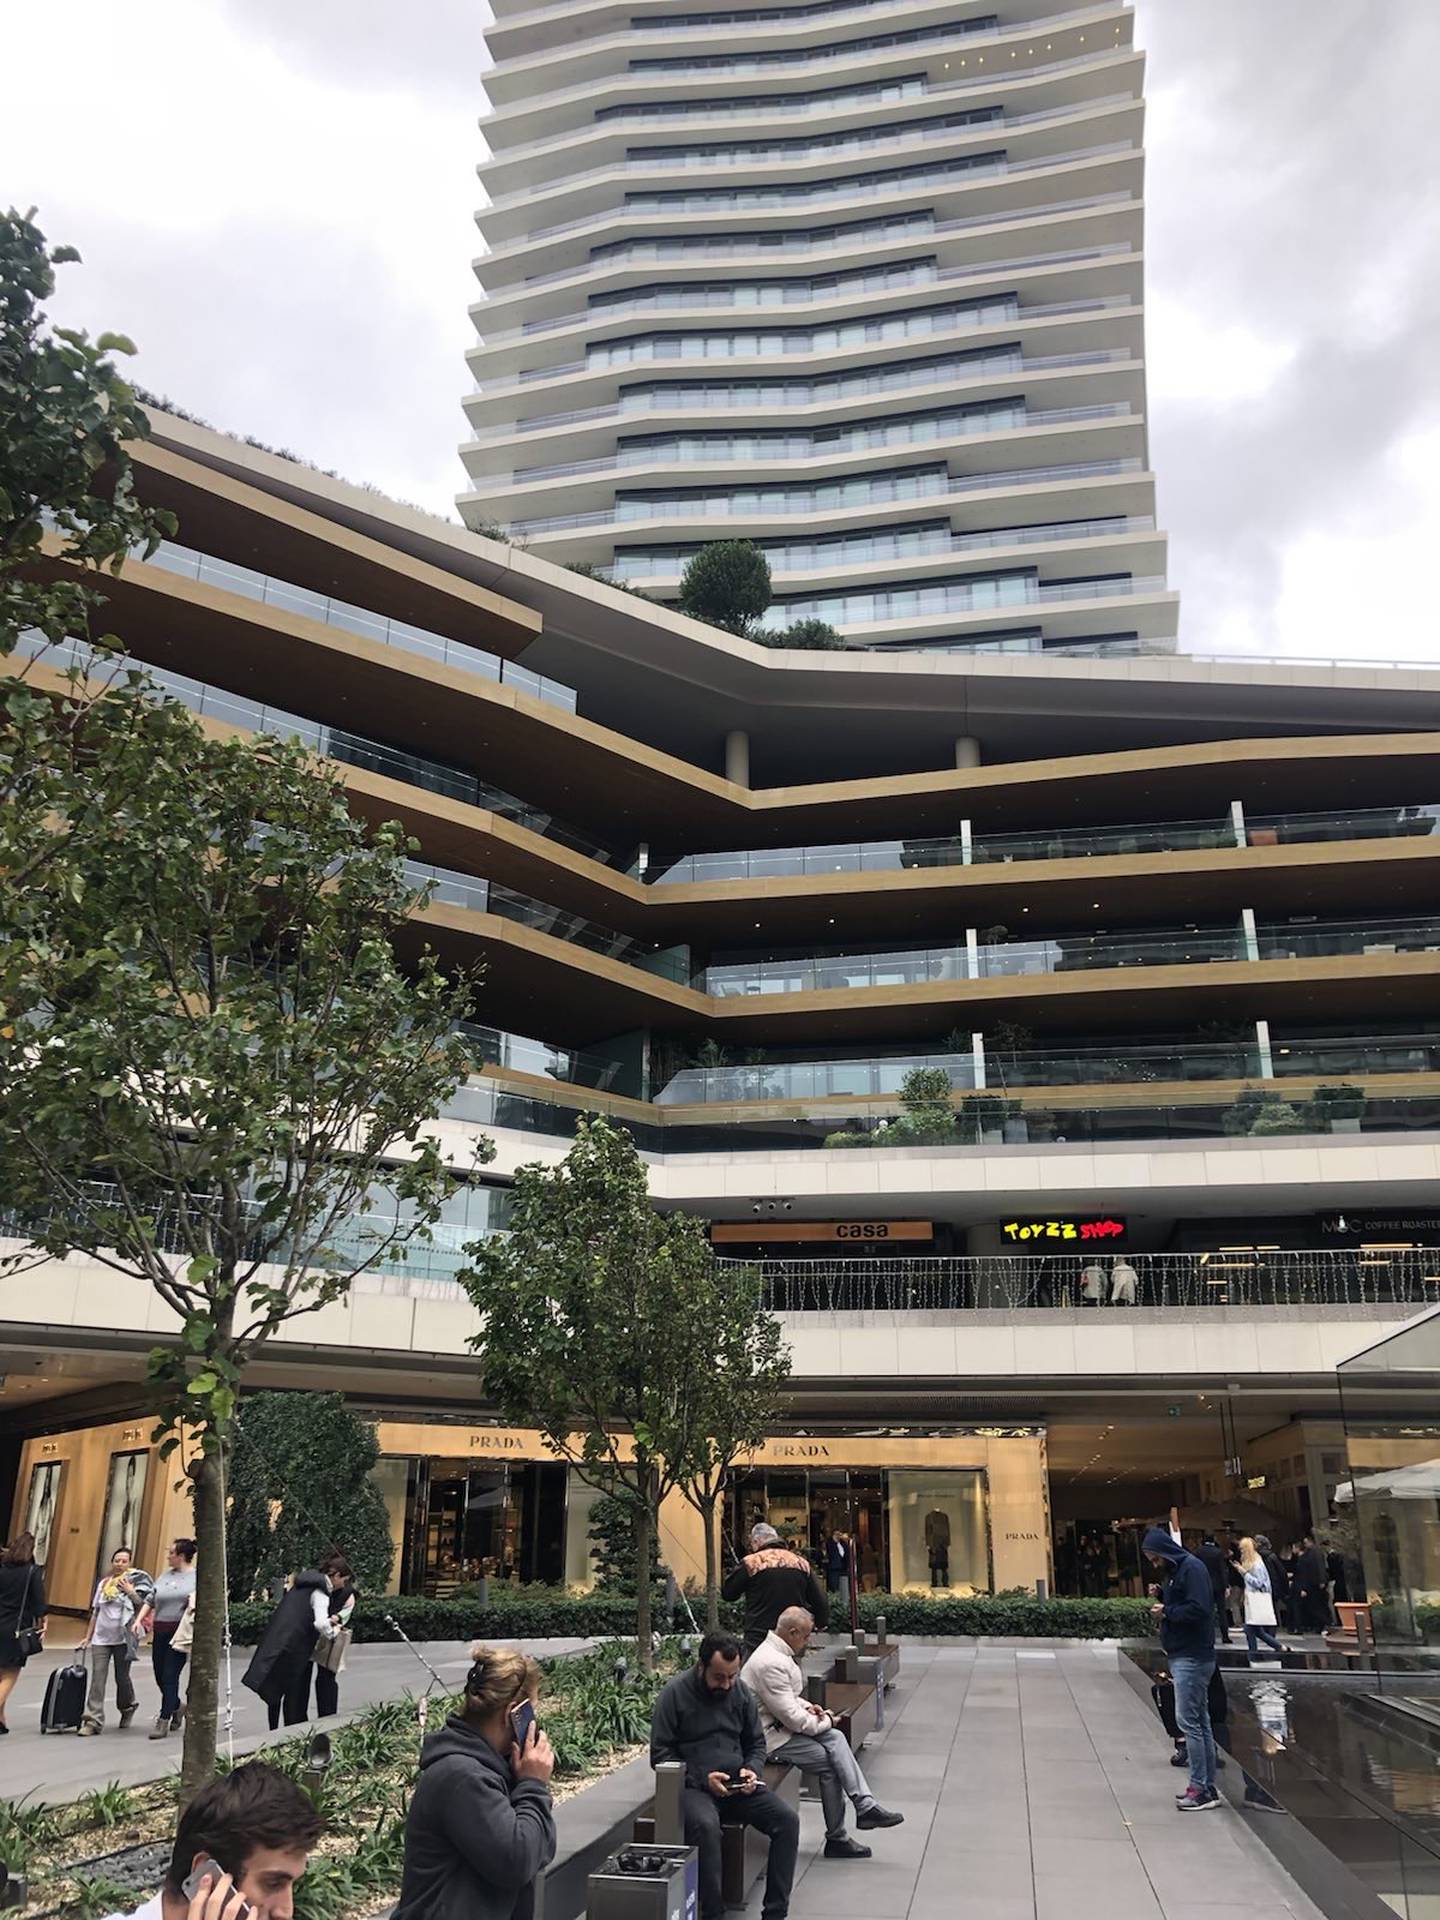 Property Invest USA opened an Istanbul office in one of the city’s prime locations, the Zorlu Center, a luxury shopping and arts centre overlooking the Bosphorus Strait.